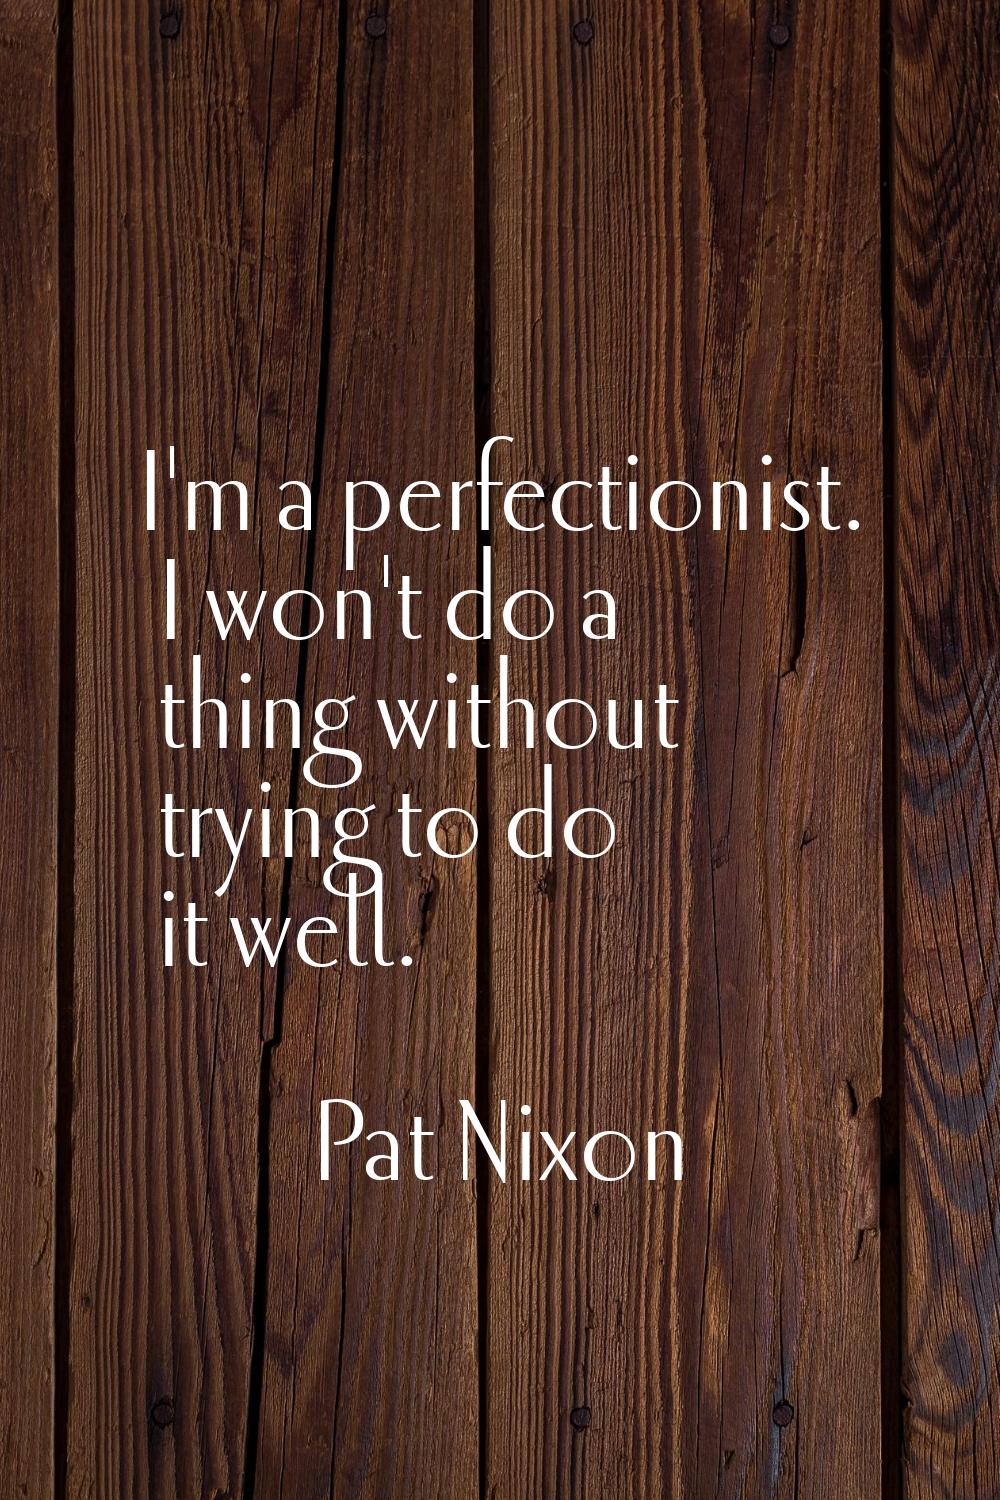 I'm a perfectionist. I won't do a thing without trying to do it well.